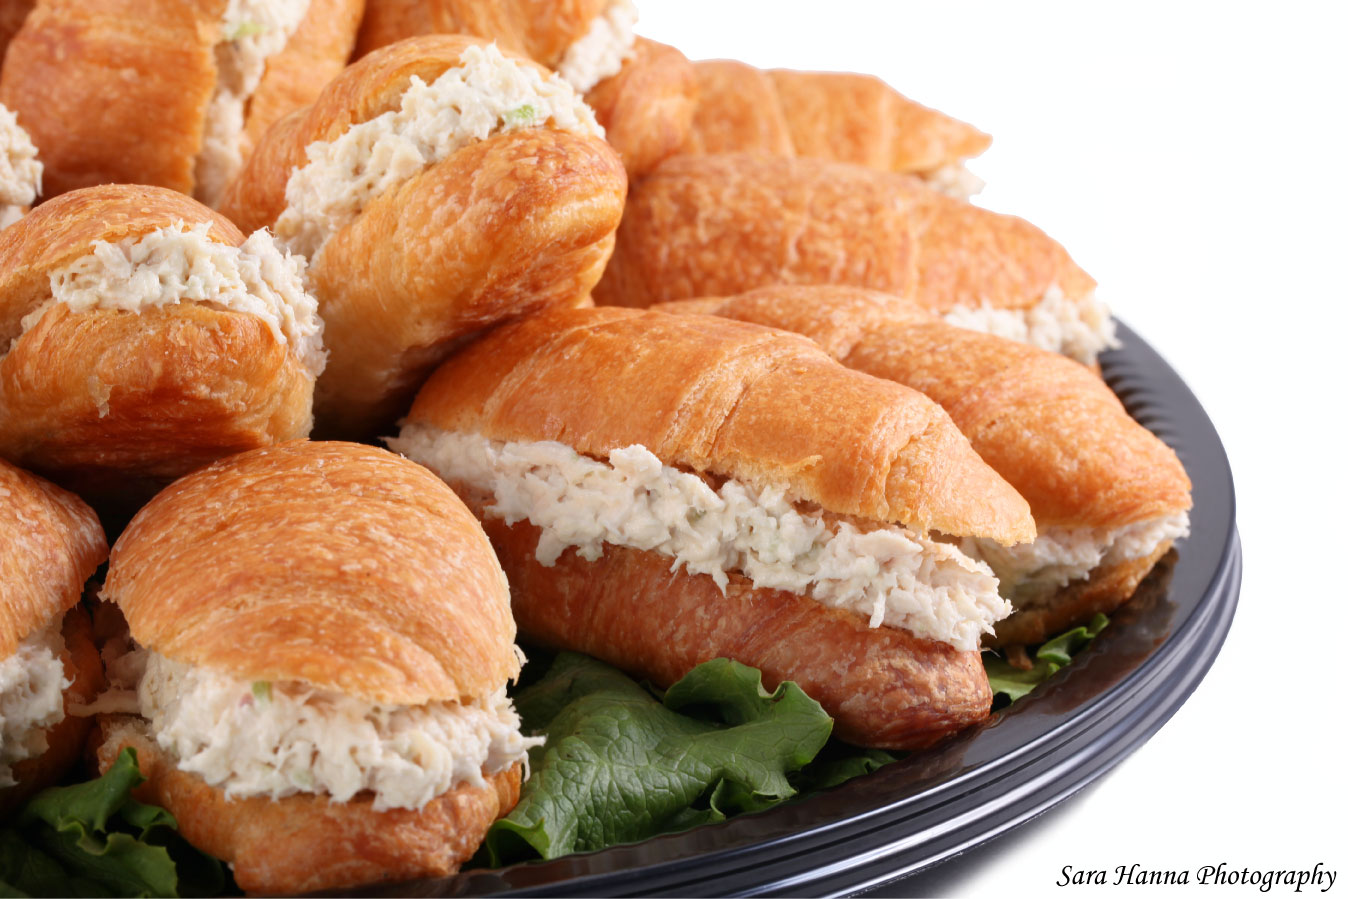 Chicken Salad Chick Orlando Opens Today by UCF – East Orlando